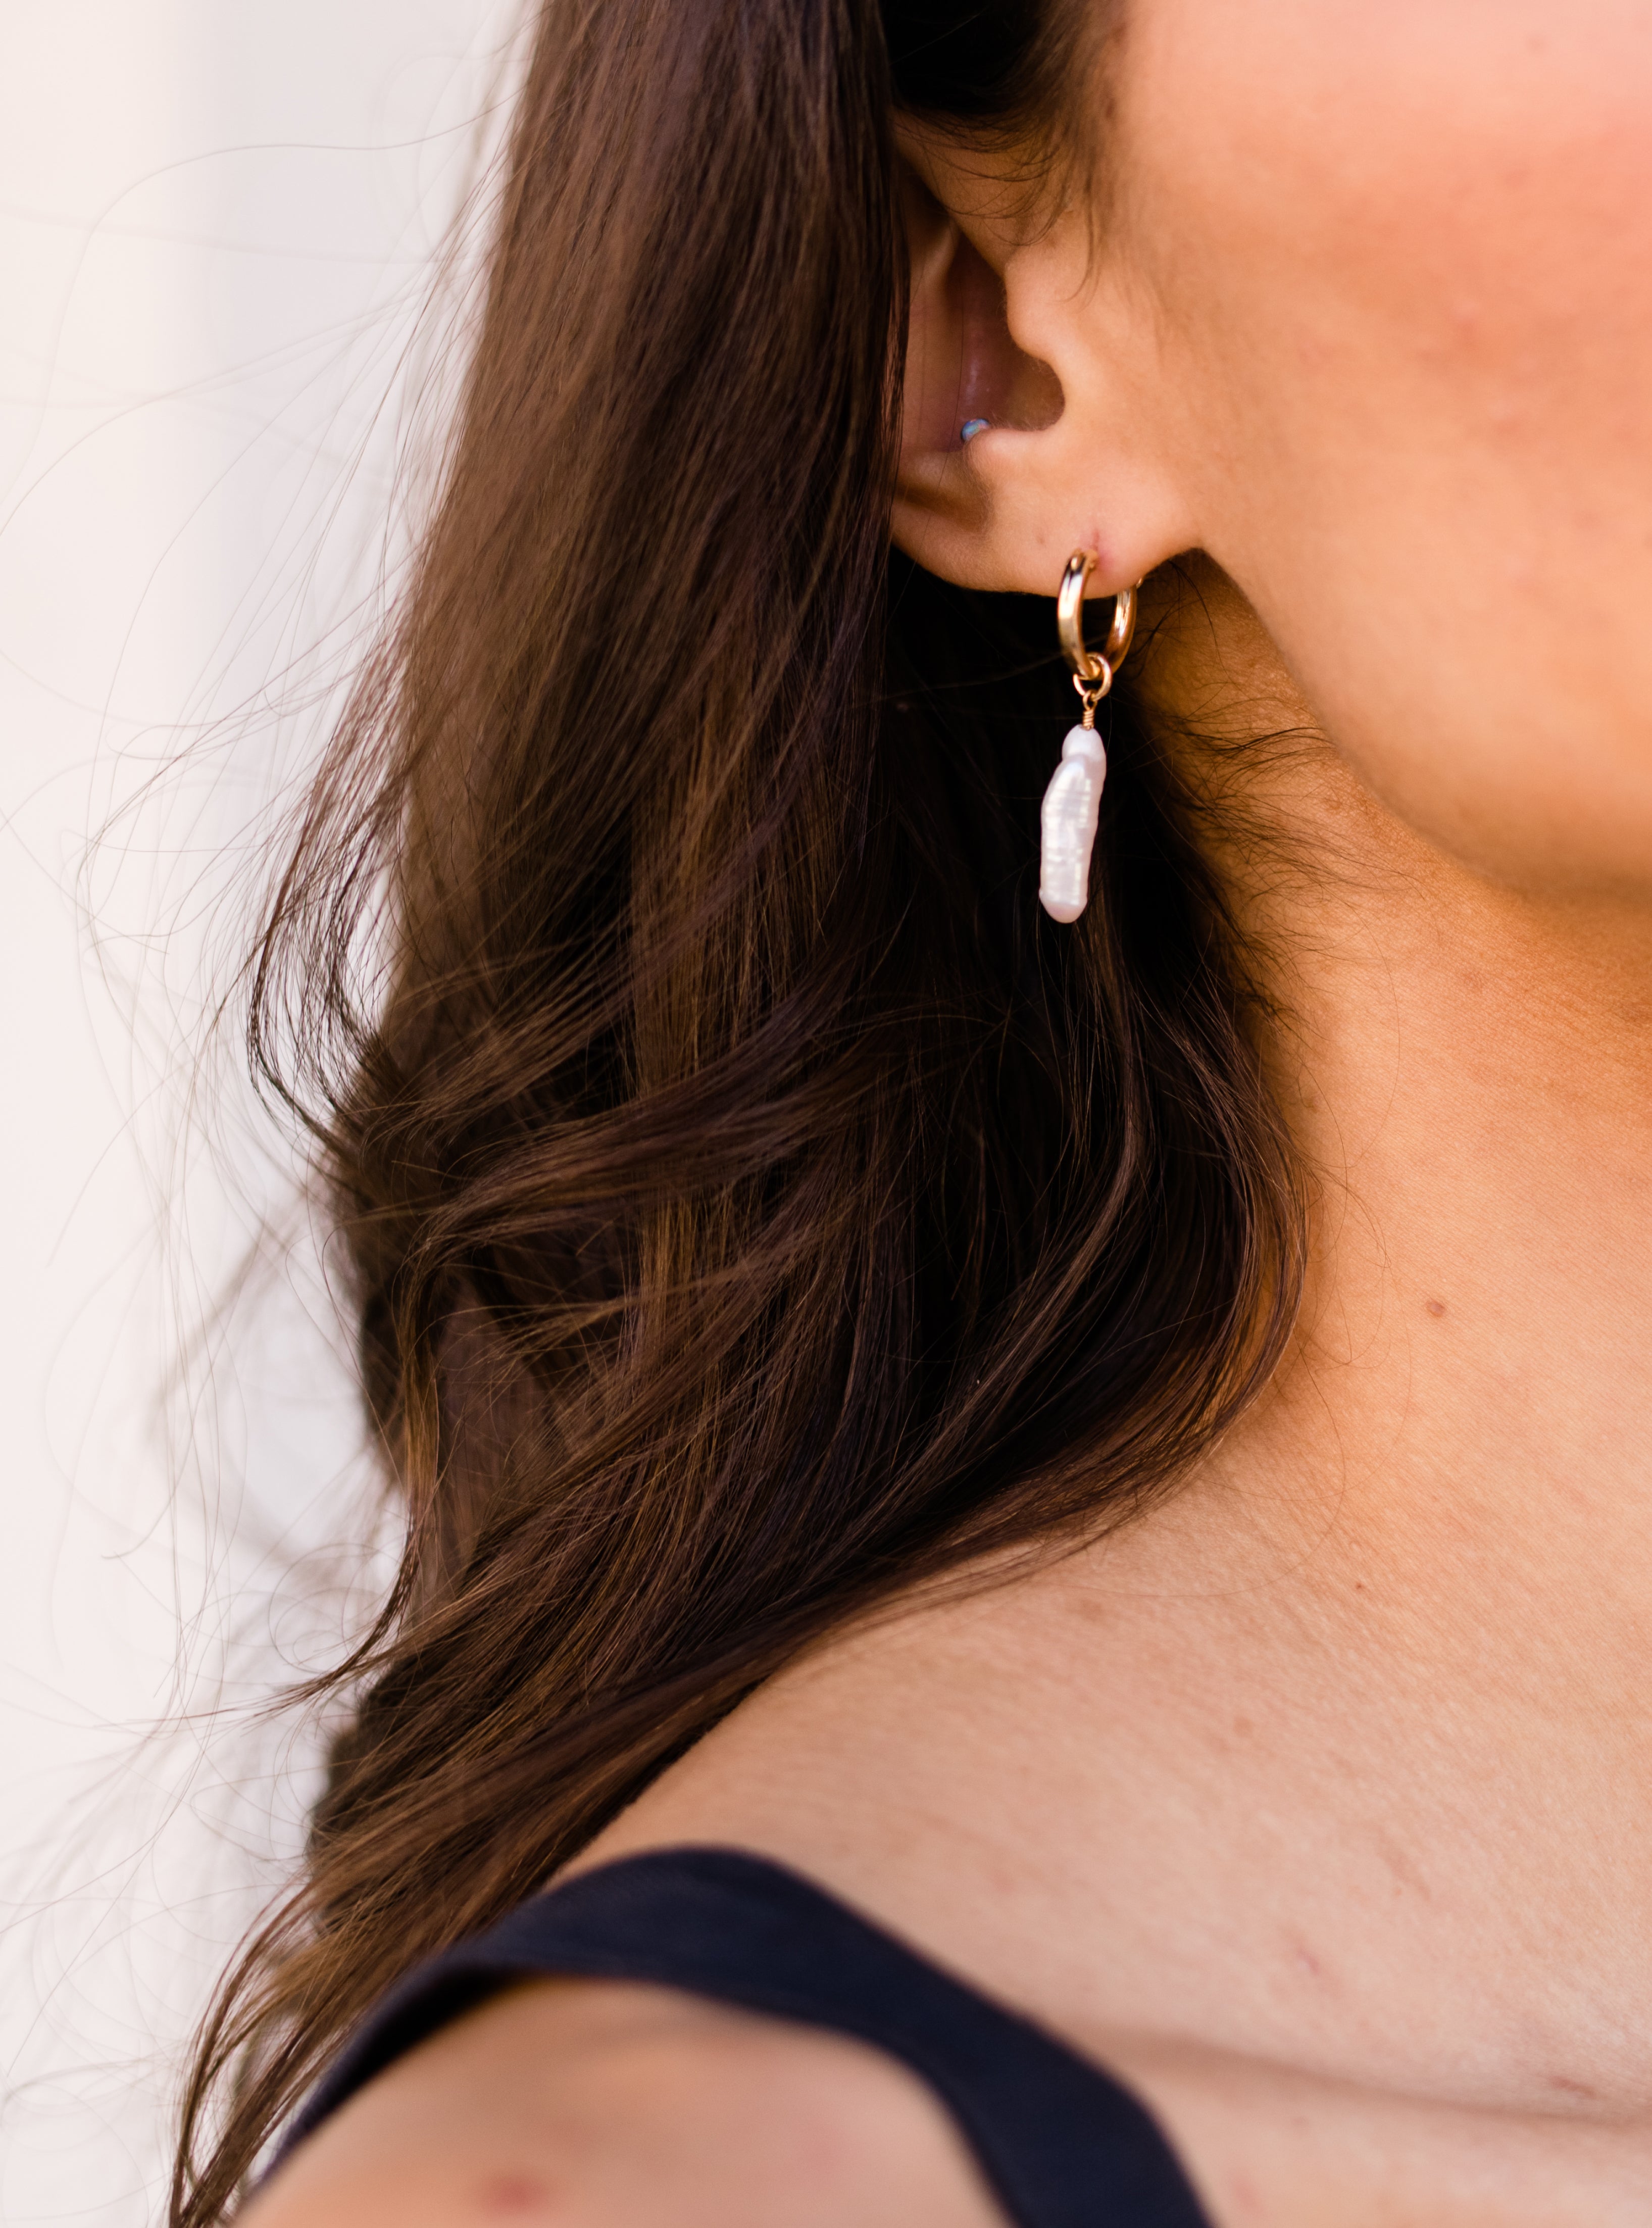 Close-up of a woman's ear wearing a pearl earring, with dark flowing hair.